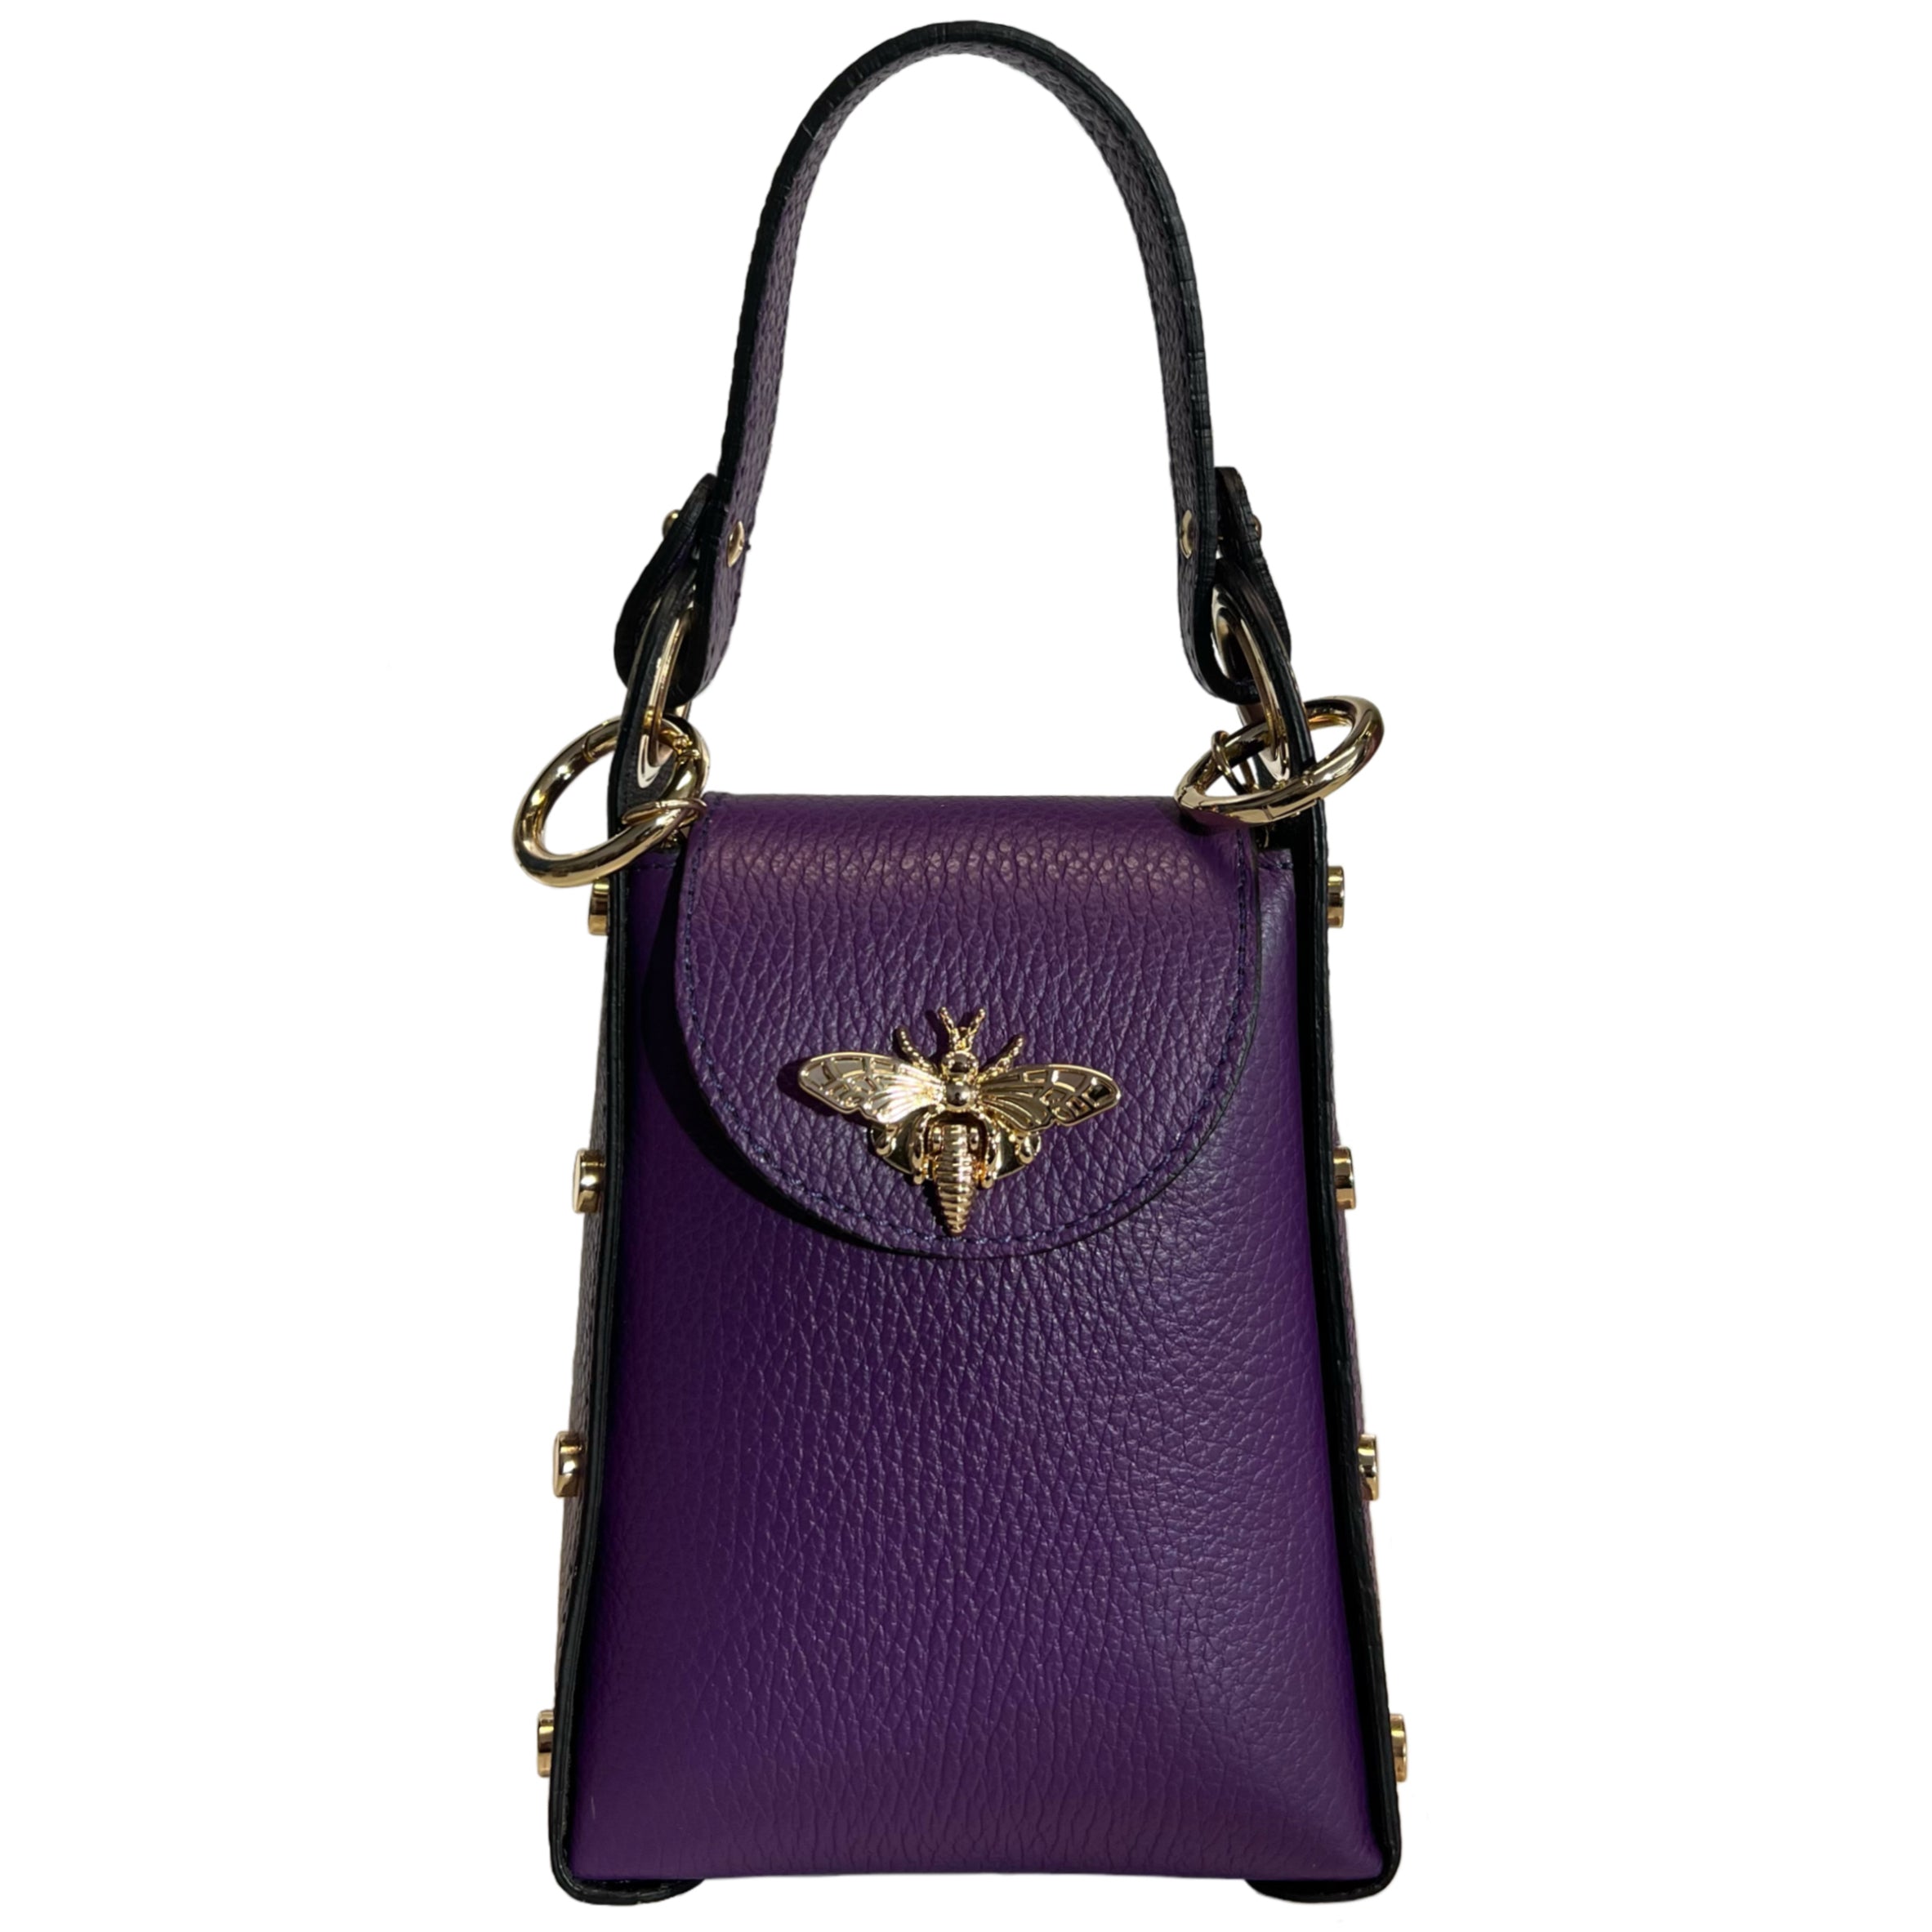 Modarno mini bag in genuine dollar leather with bee-shaped lobster clasp closure